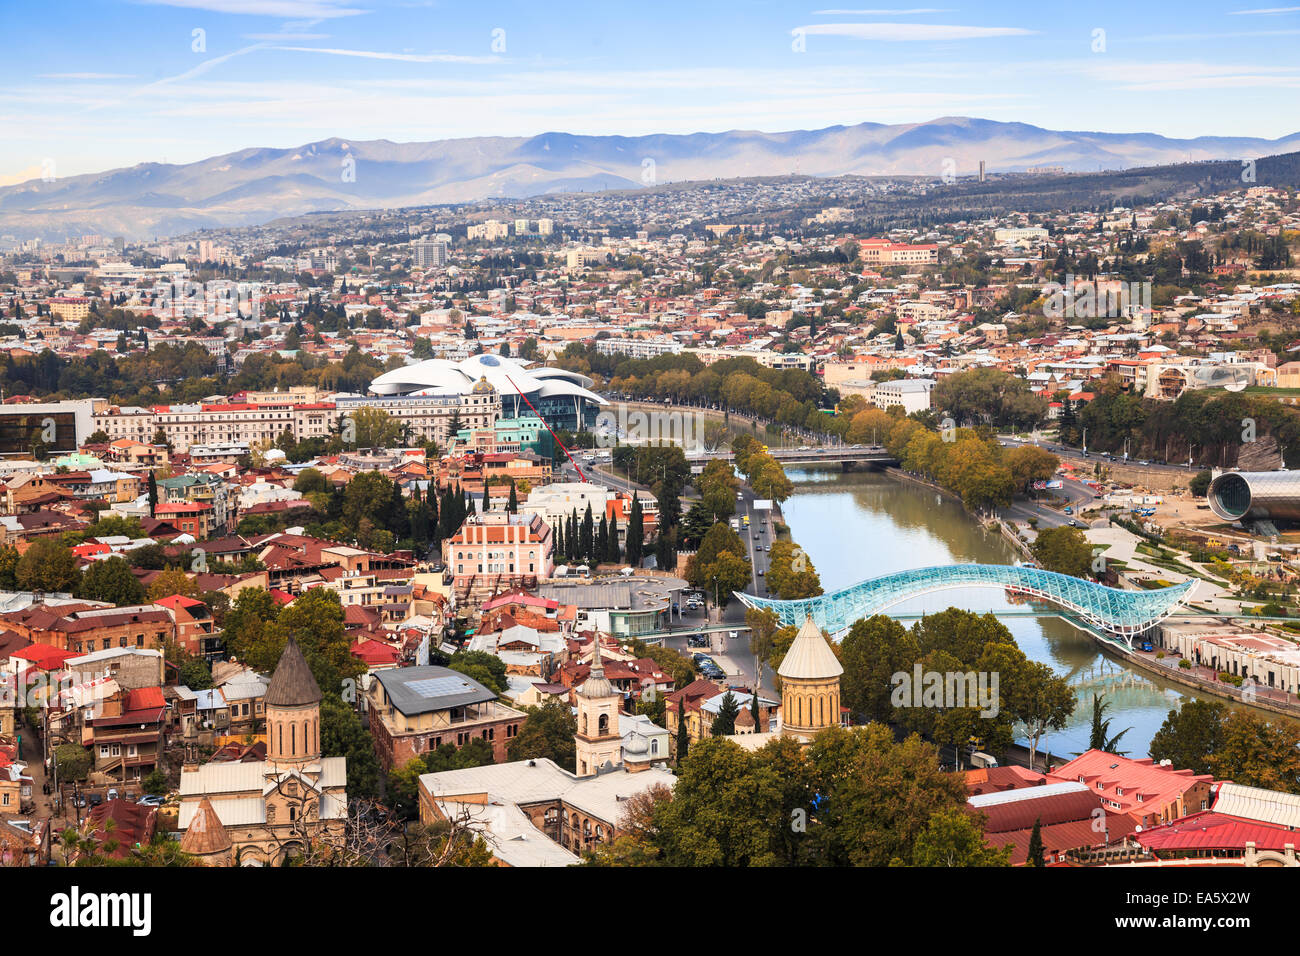 View of skyline in Tbilisi, the capital city of Georgia Stock Photo